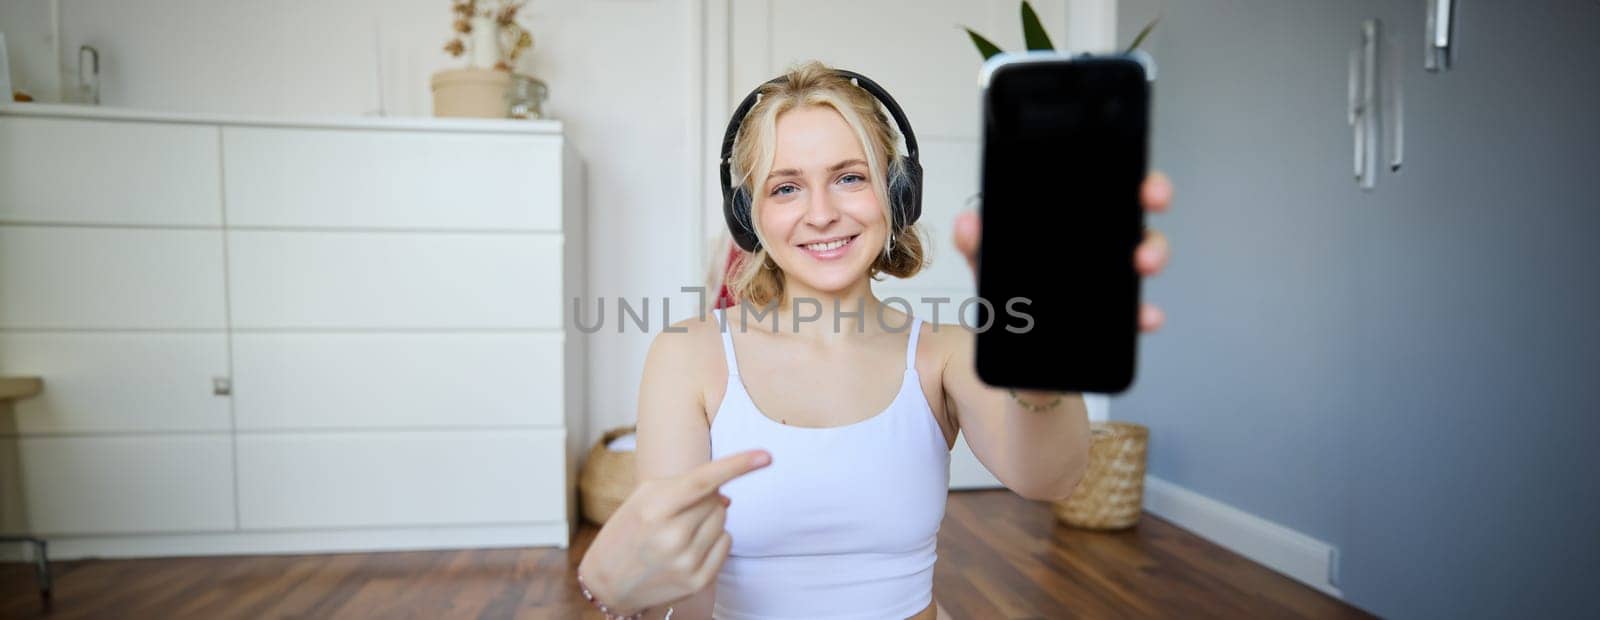 Portrait of fitness instructor showing her favourite workout app, pointing finger at smartphone screen, showing mobile app on camera, smiling and looking satisfied, wearing headphones.